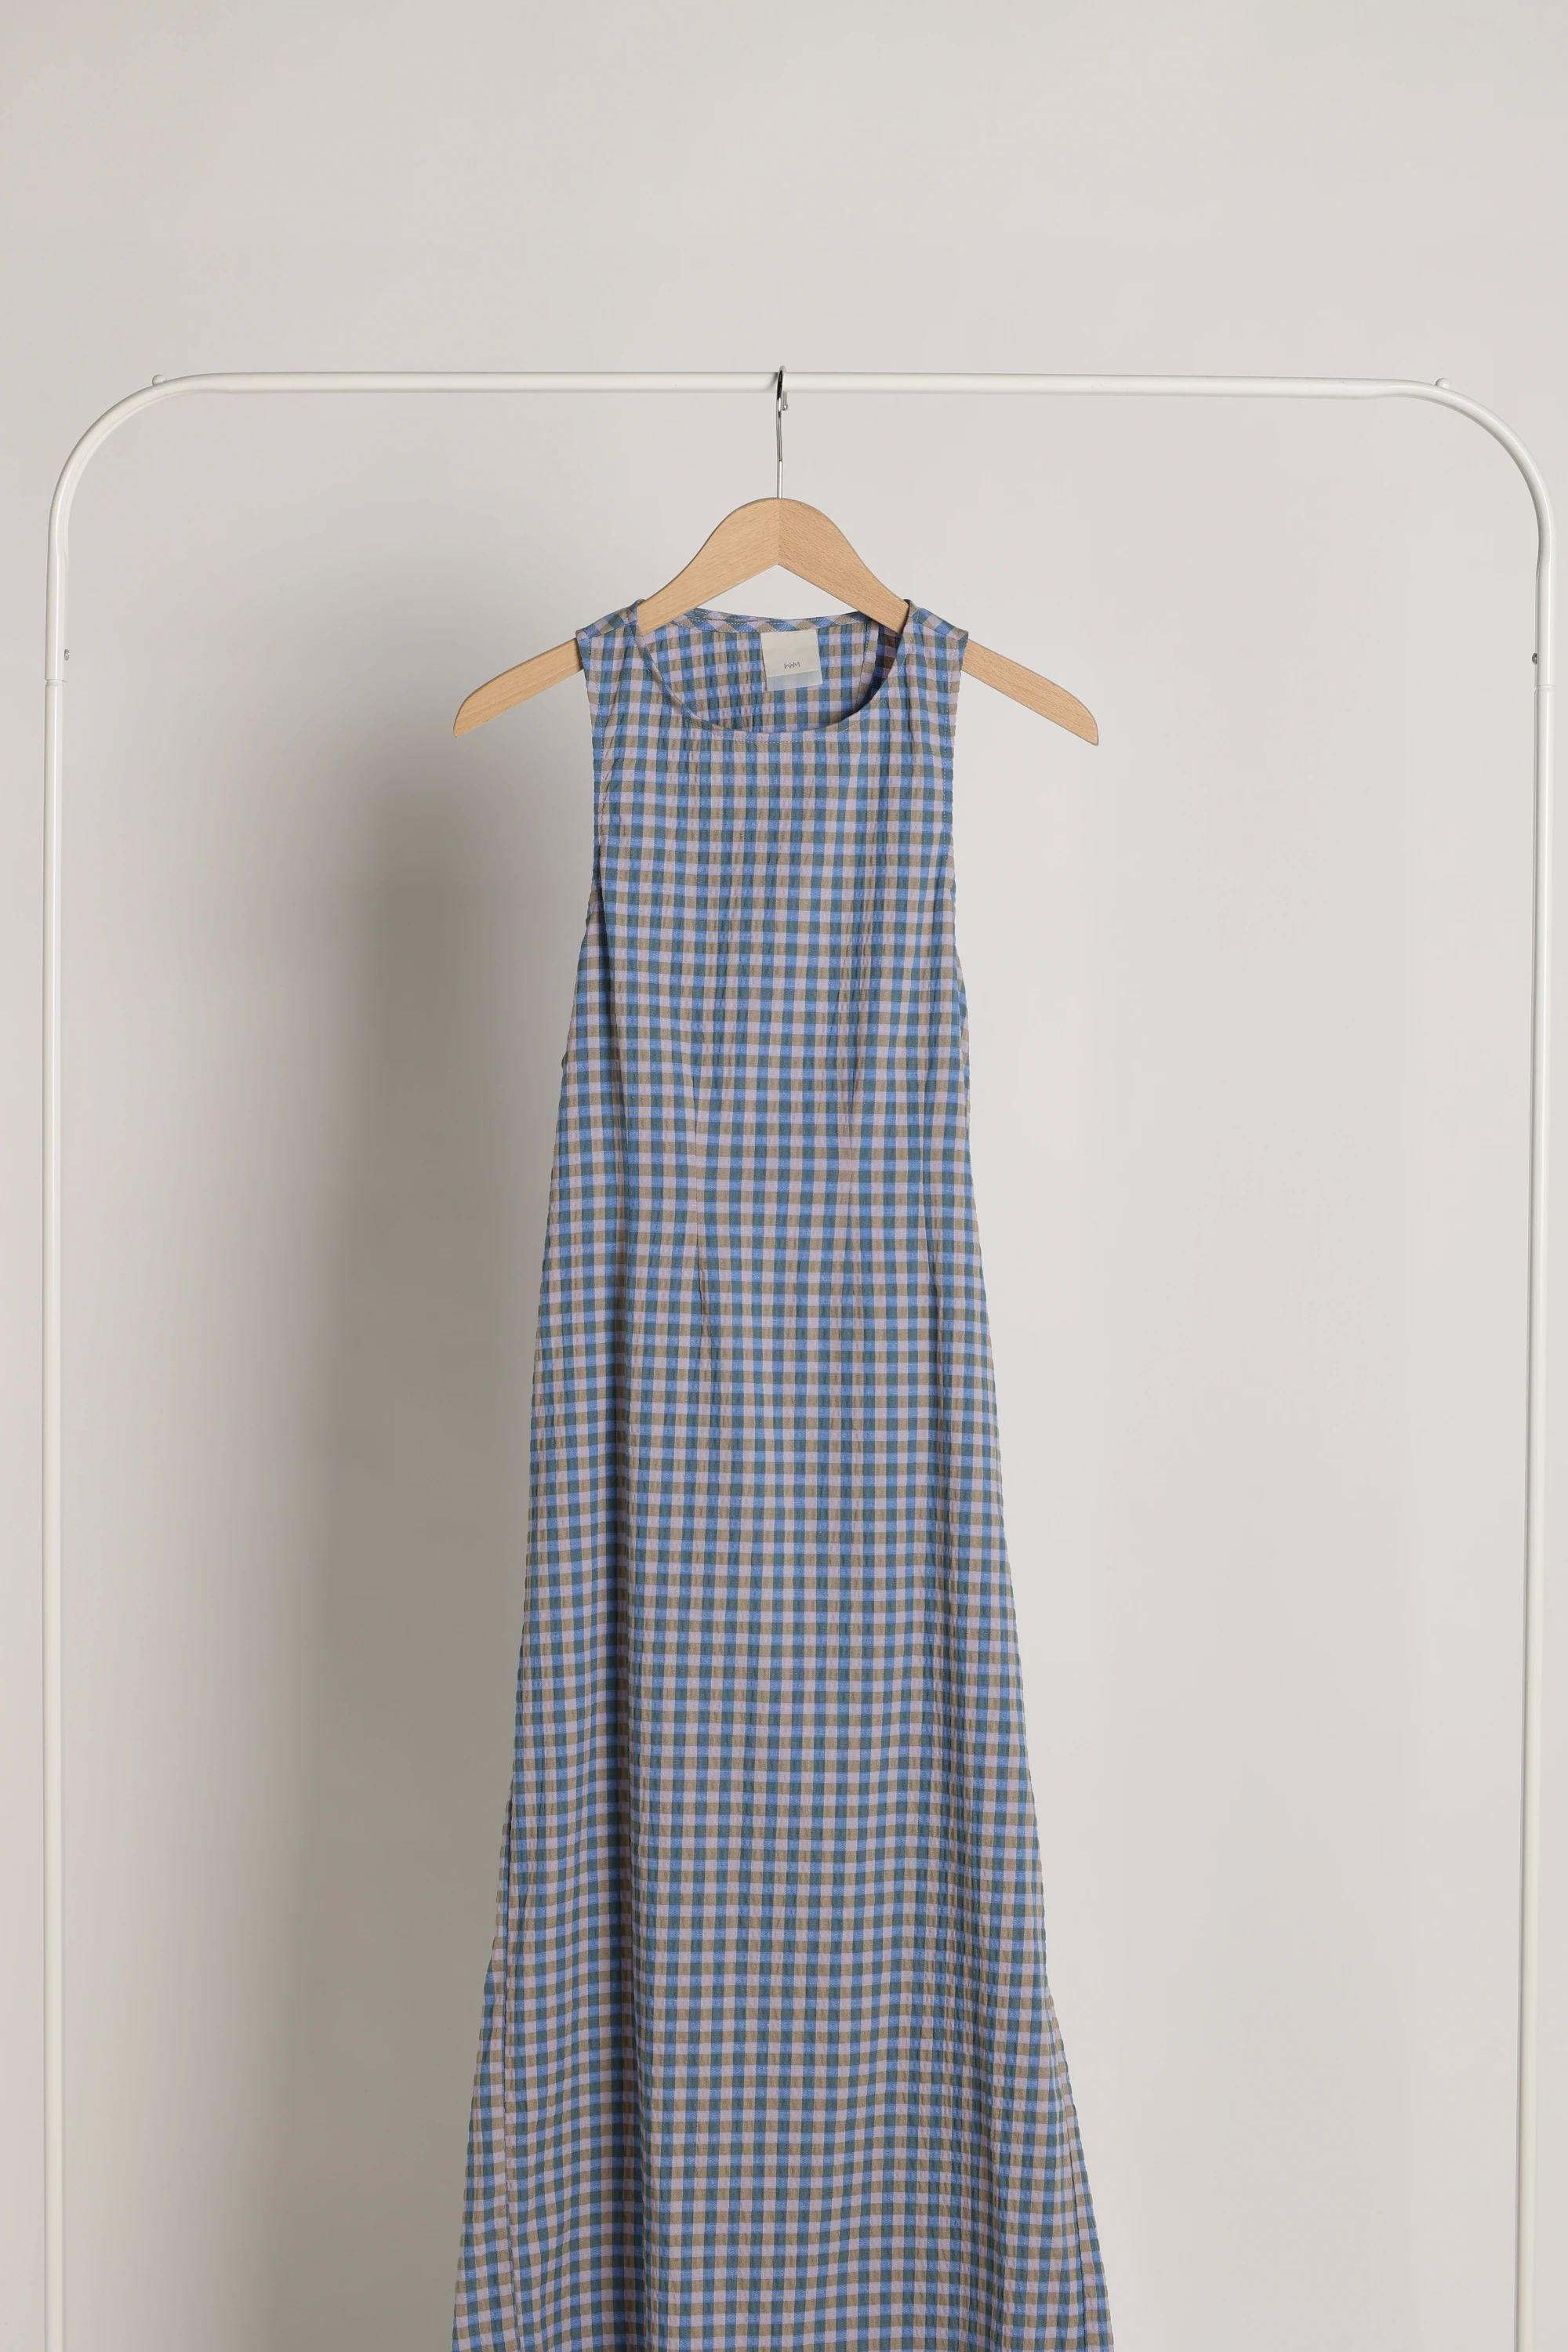 GINGHAM CHECK ONE PIECE